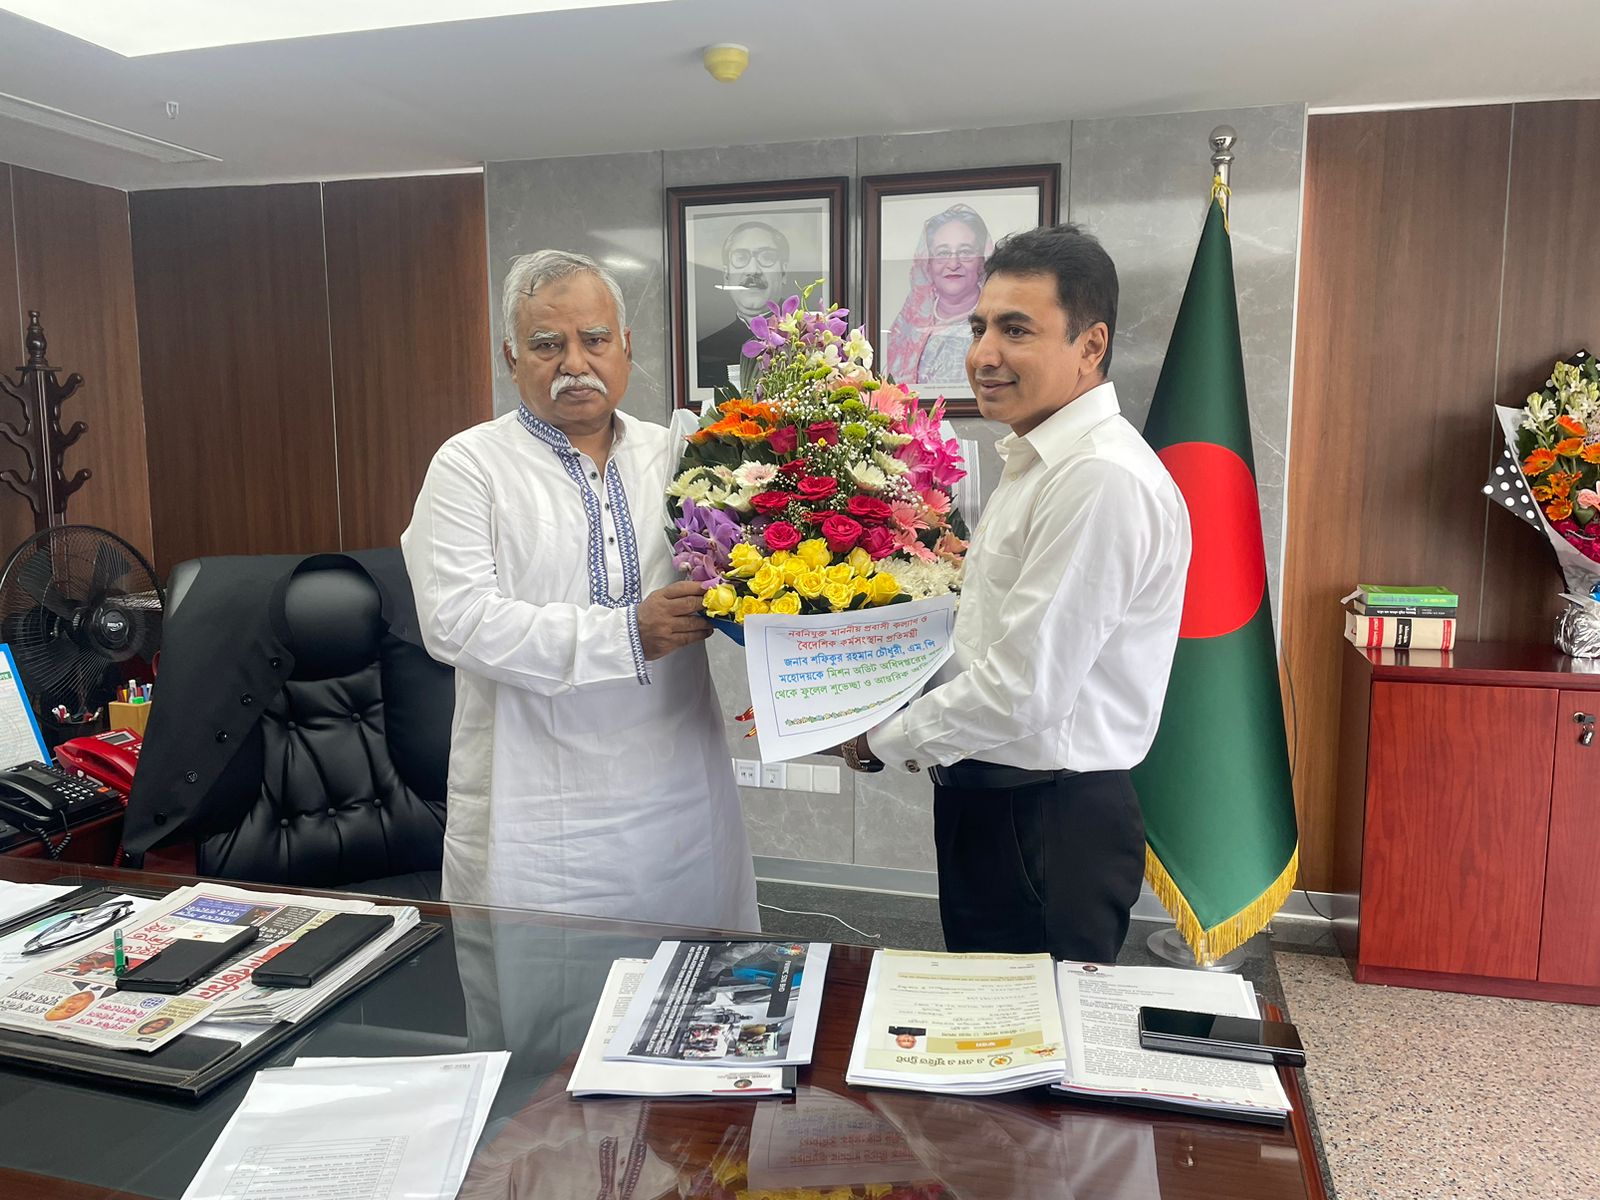 Mr Md Golam Rahman, DG of Mission Audit Directorate has met to congratulate to Mr Shafiqur Rahman Chowdhury hon'ble state minister of Ministry of MoEWOE